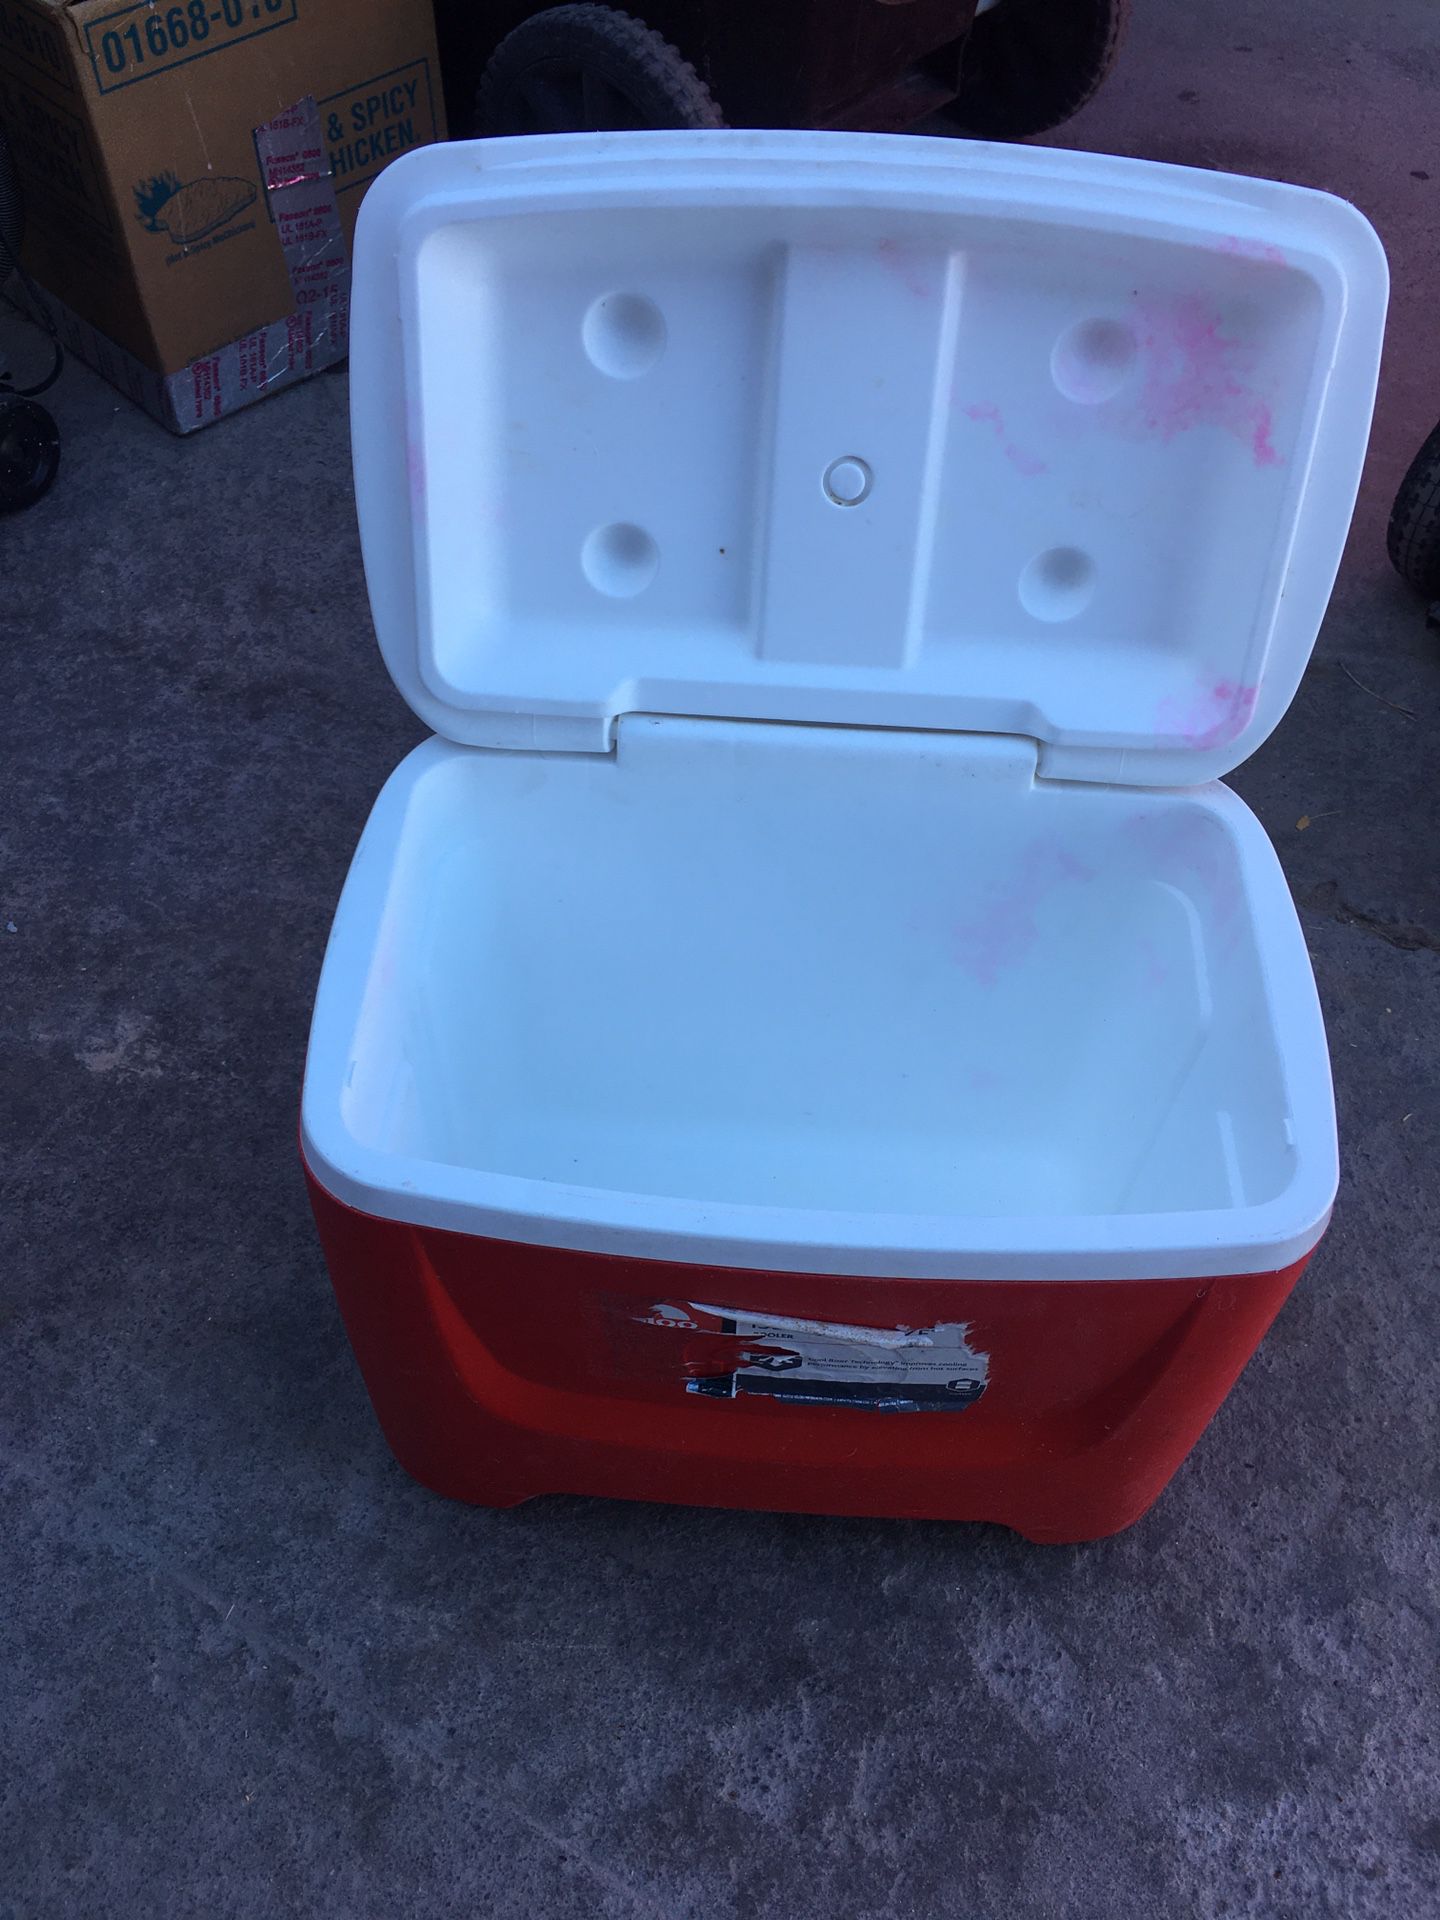 Small cooler